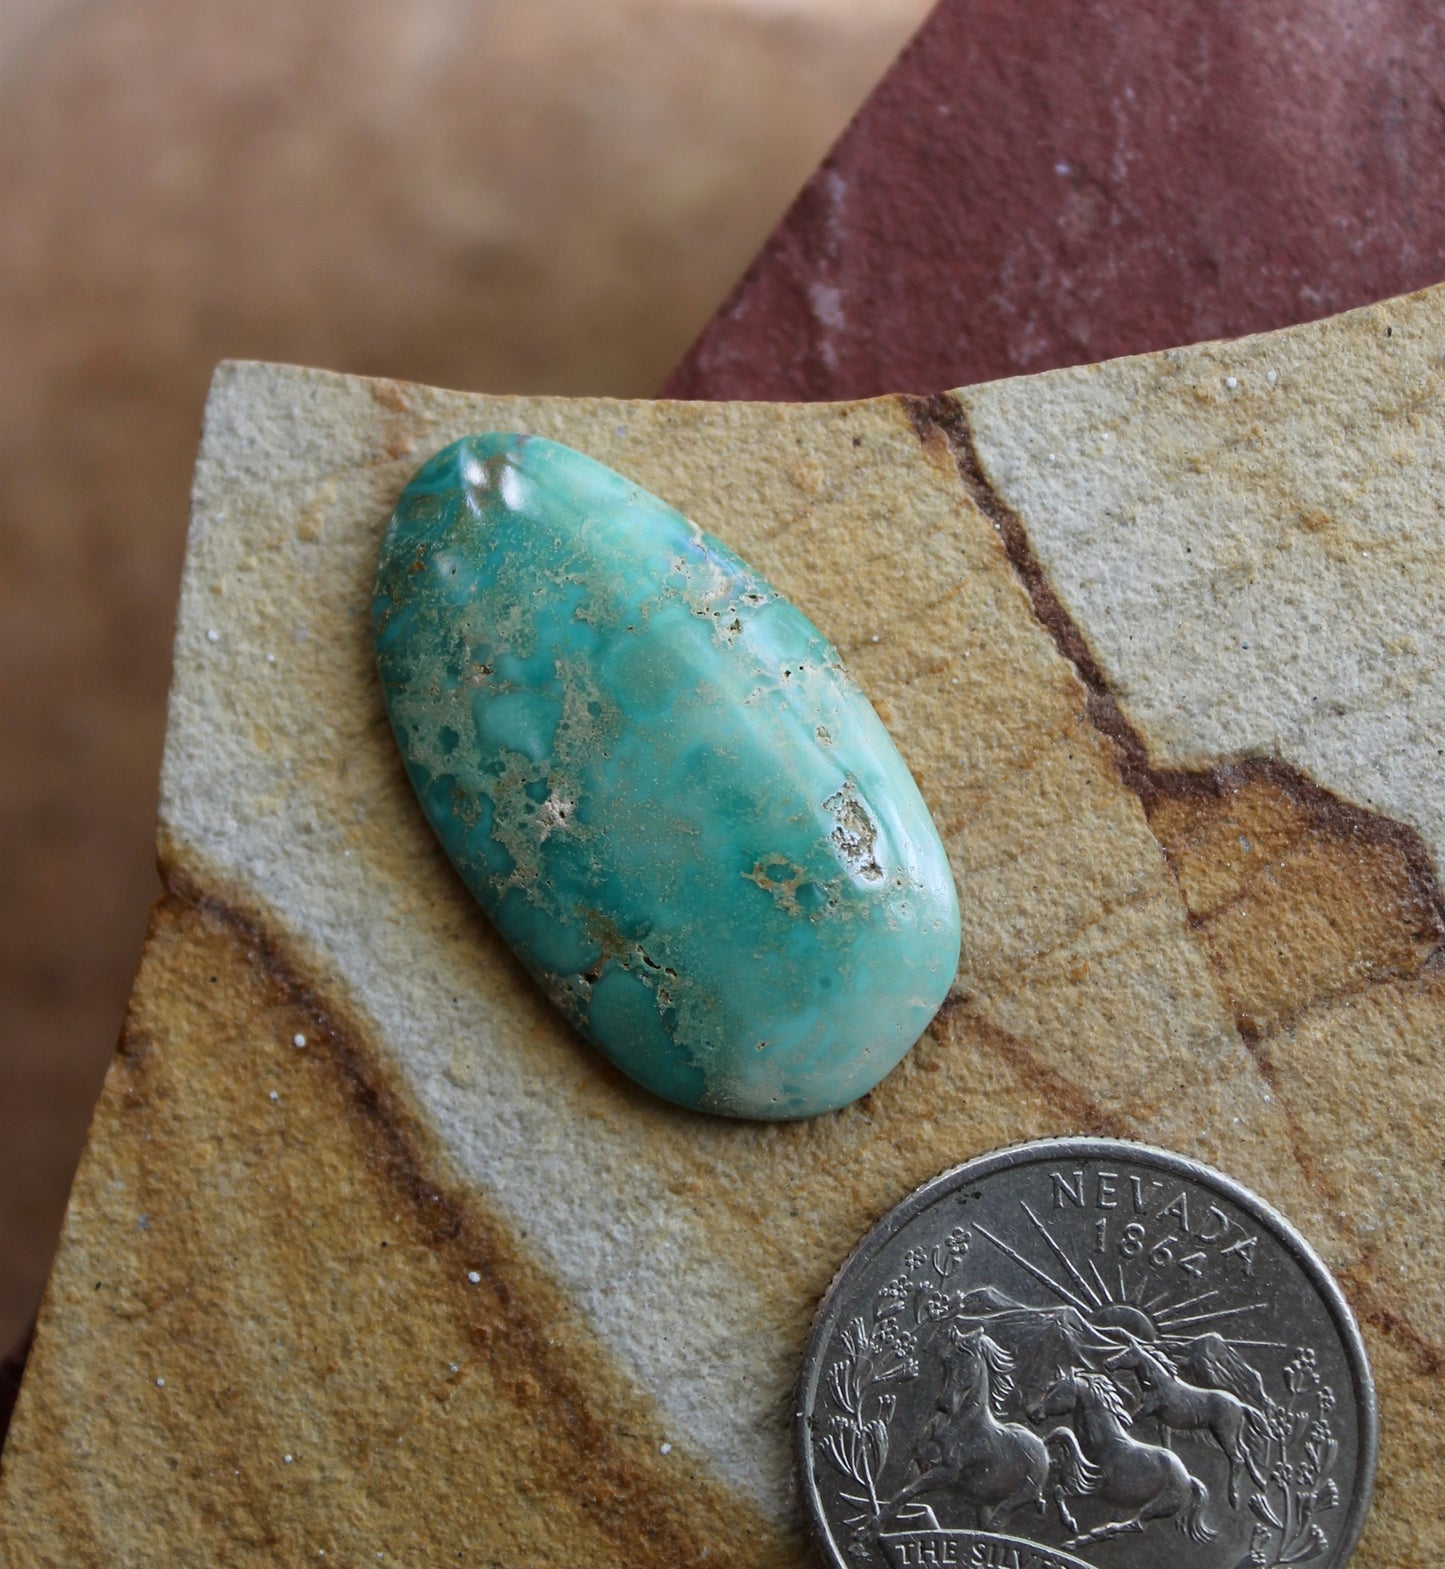 16 carat green Stone Mountain Turquoise cabochon